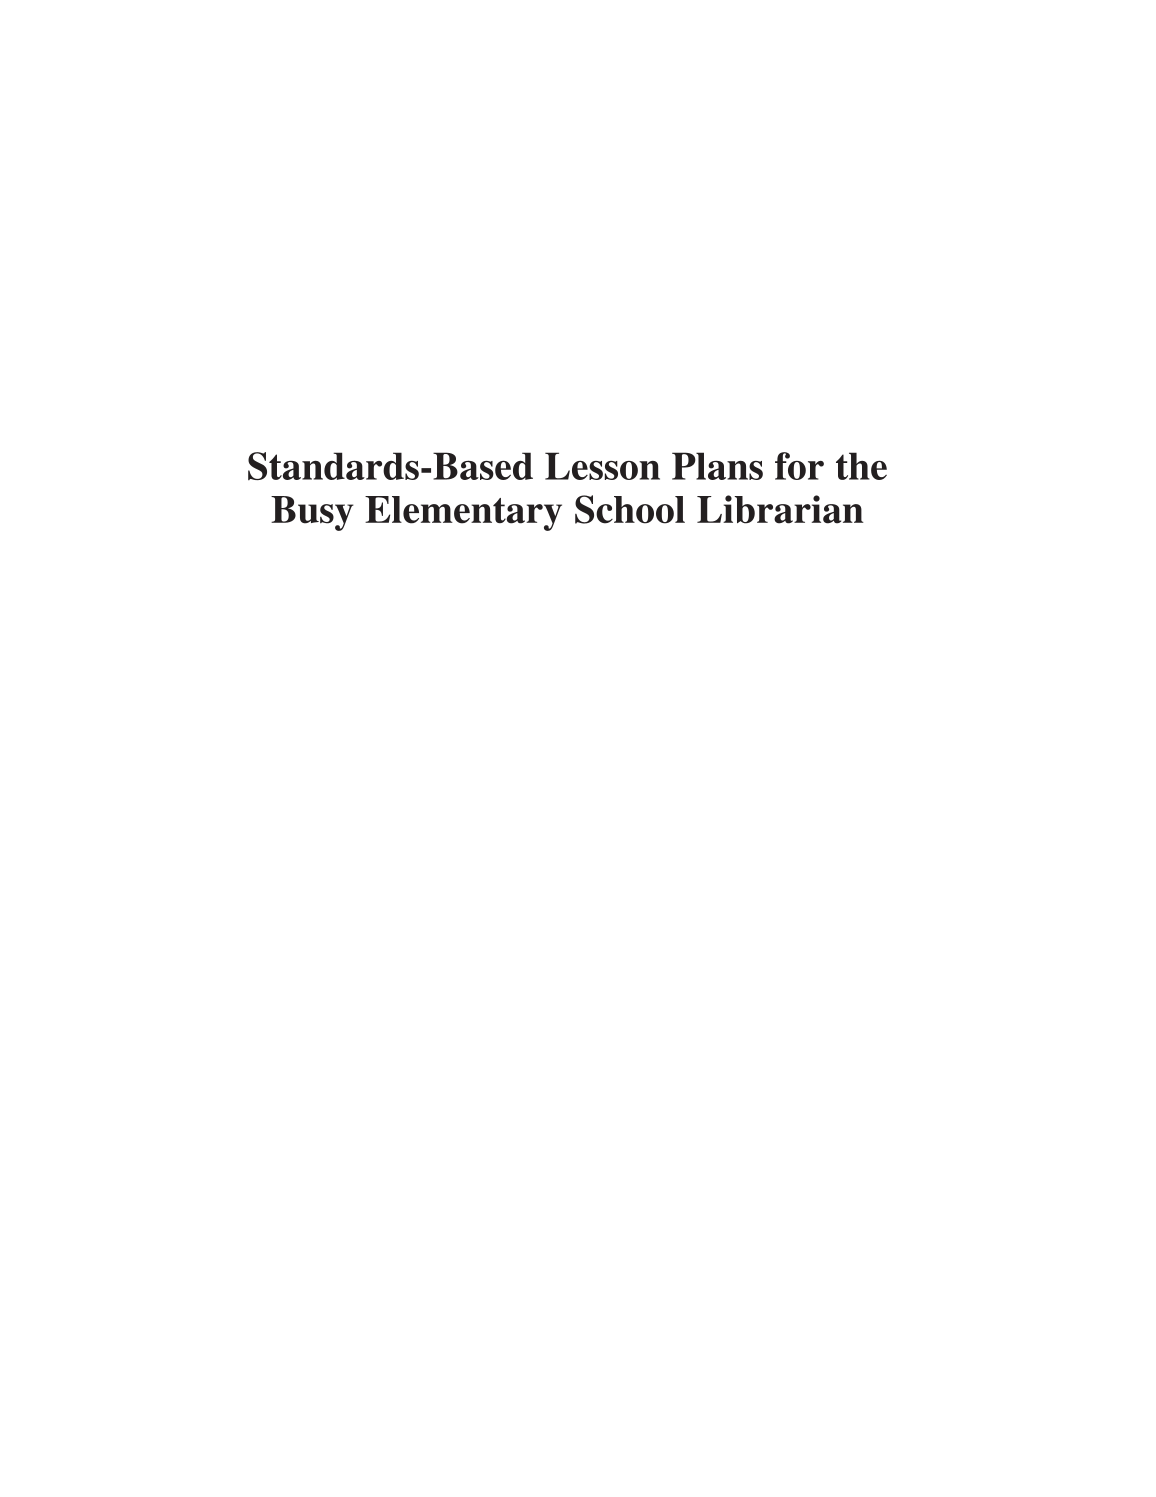 Standards-Based Lesson Plans for the Busy Elementary School Librarian page i